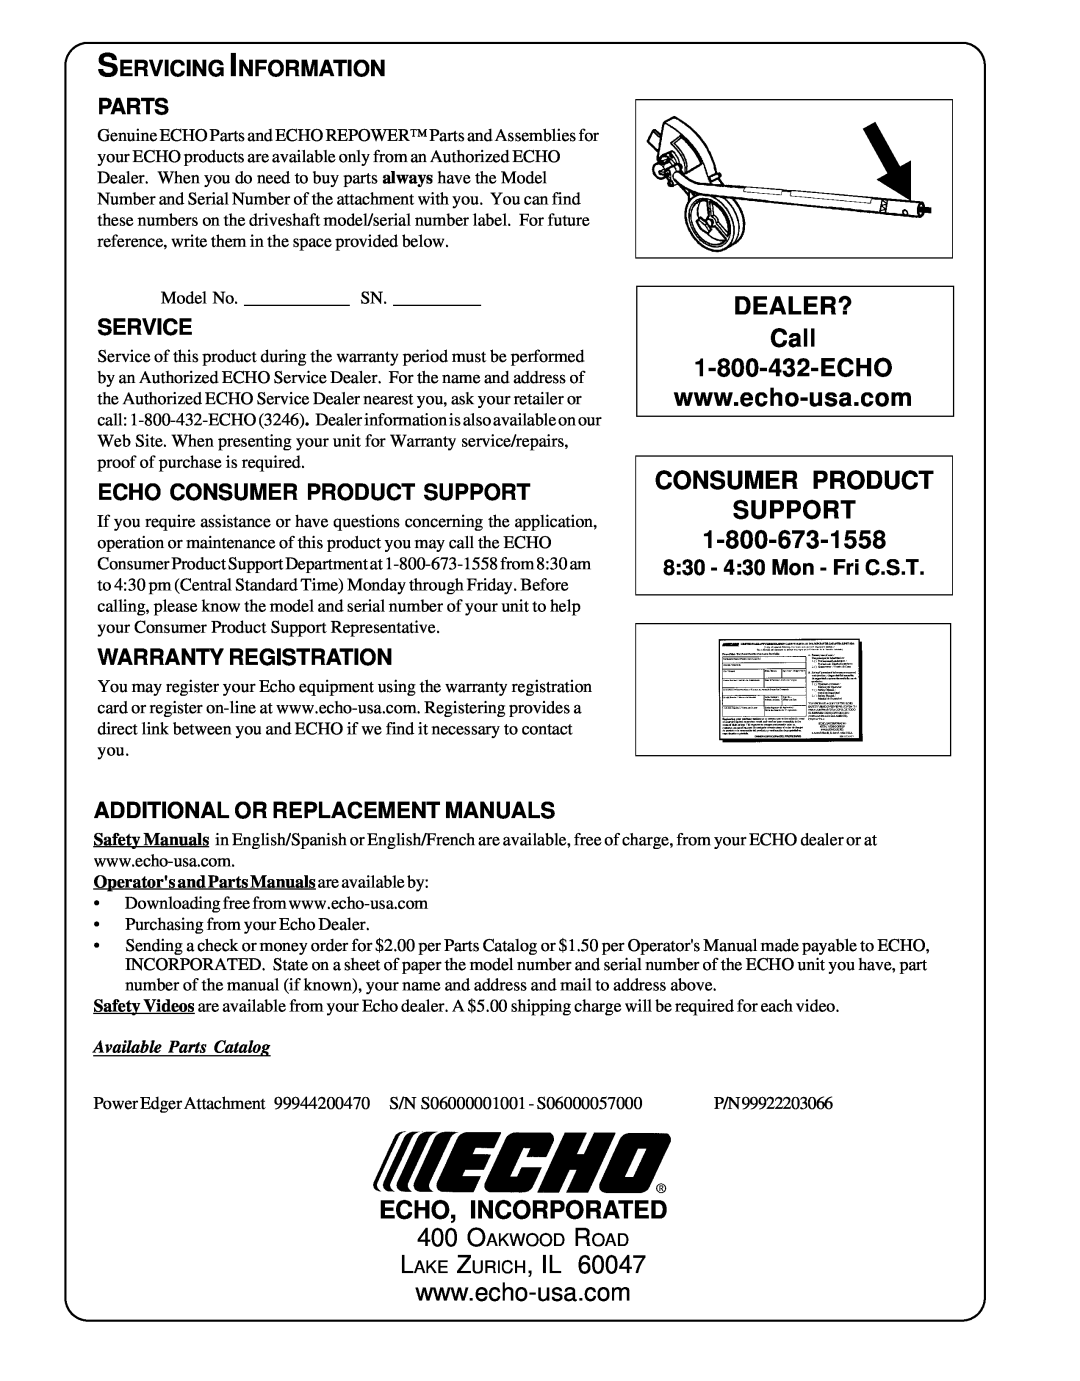 Echo 99944200470 DEALER? Call 1-800-432-ECHO, Consumer Product Support, Echo, Incorporated, Servicing Information Parts 